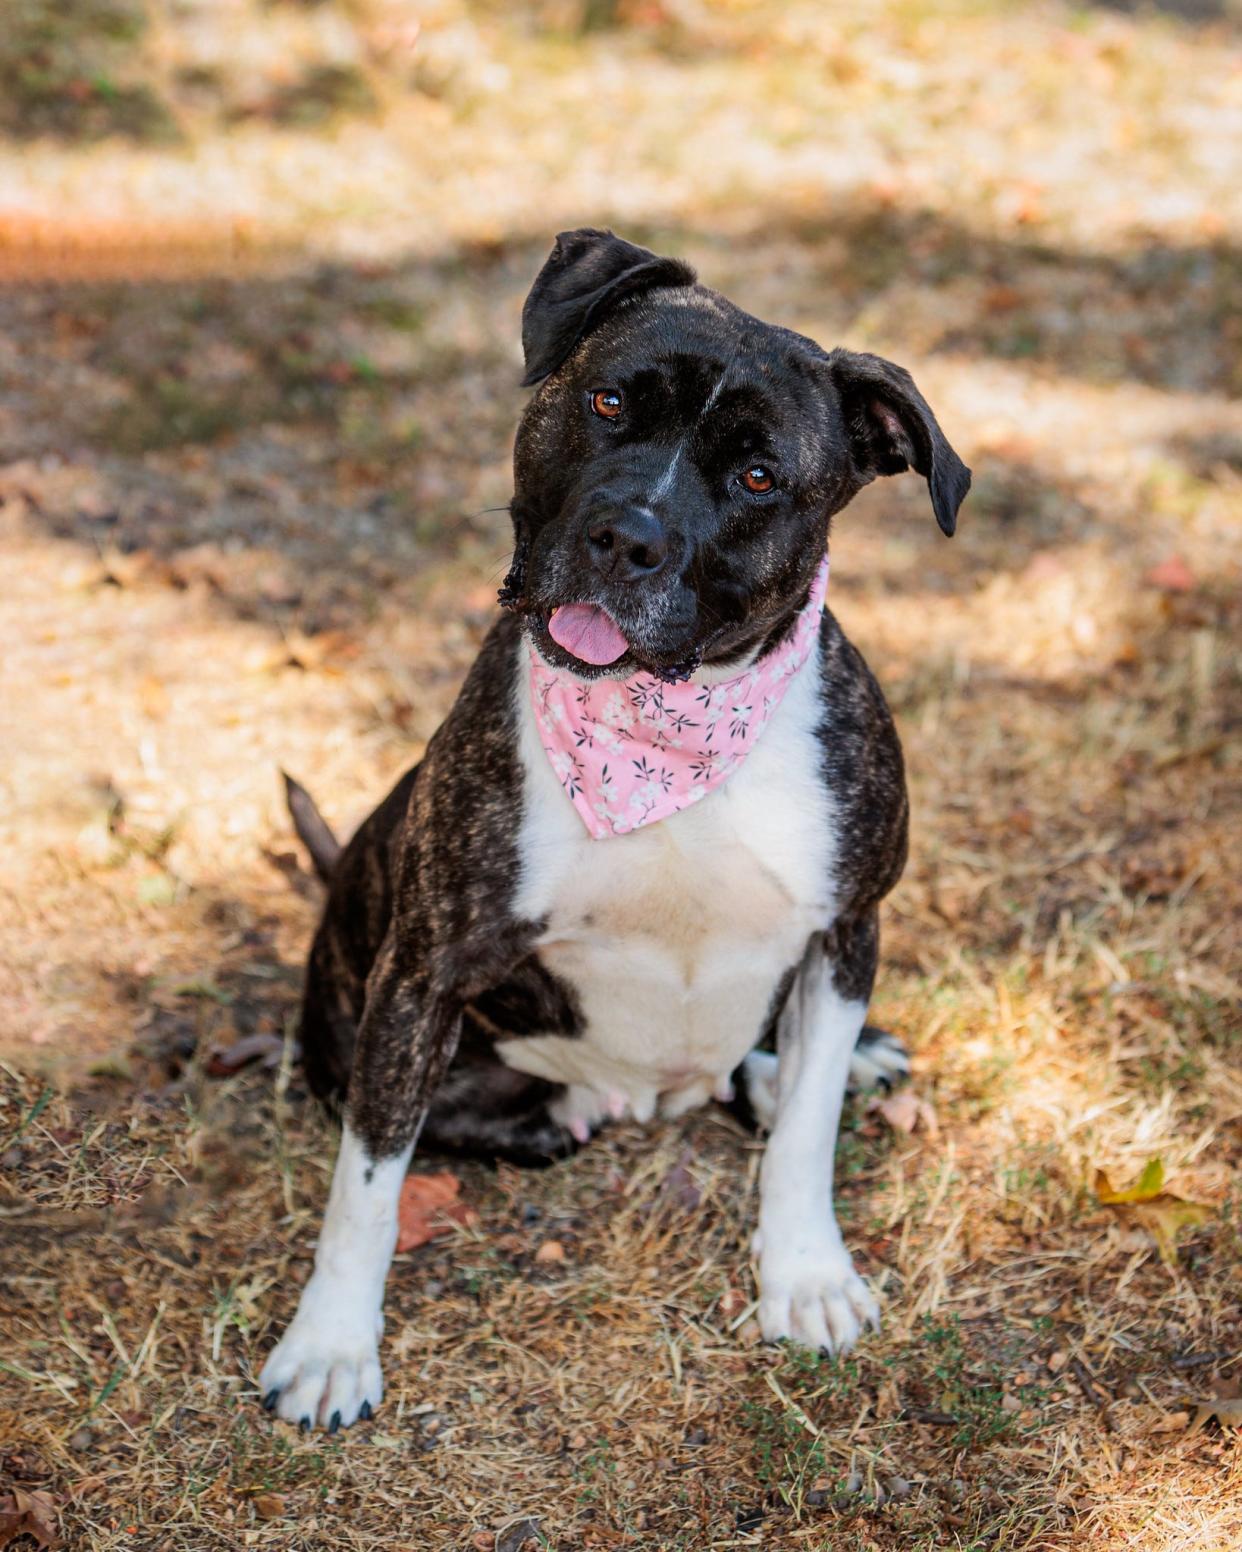 Bindie, age 4, is an American Pit Bull Terrier Mix available for adoption at Kentucky Humane Society